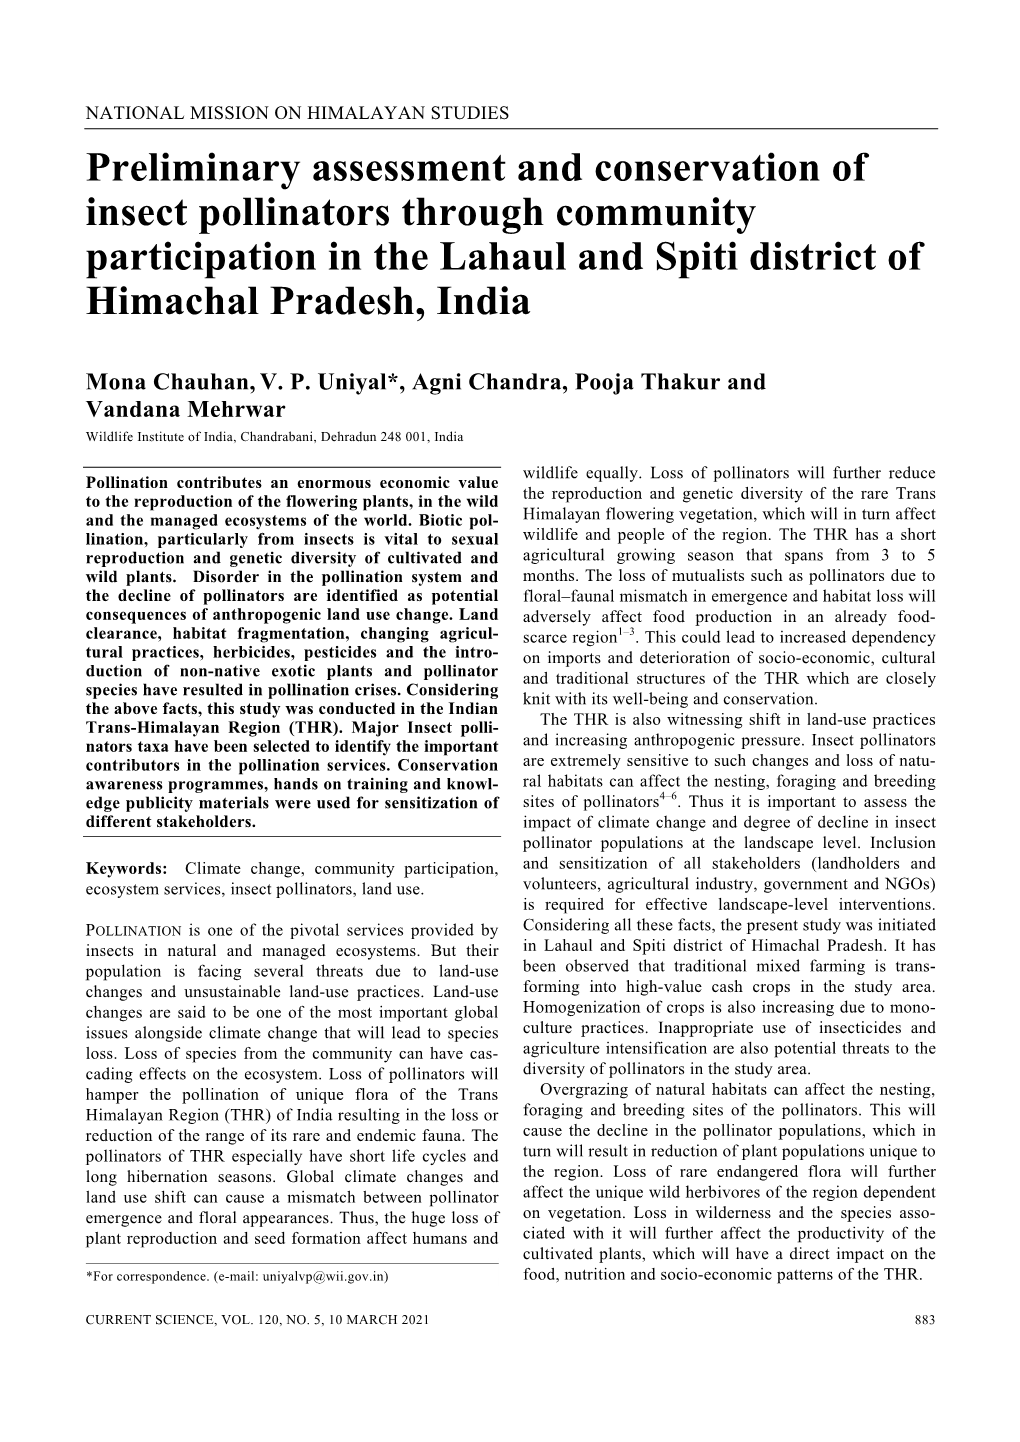 Preliminary Assessment and Conservation of Insect Pollinators Through Community Participation in the Lahaul and Spiti District of Himachal Pradesh, India